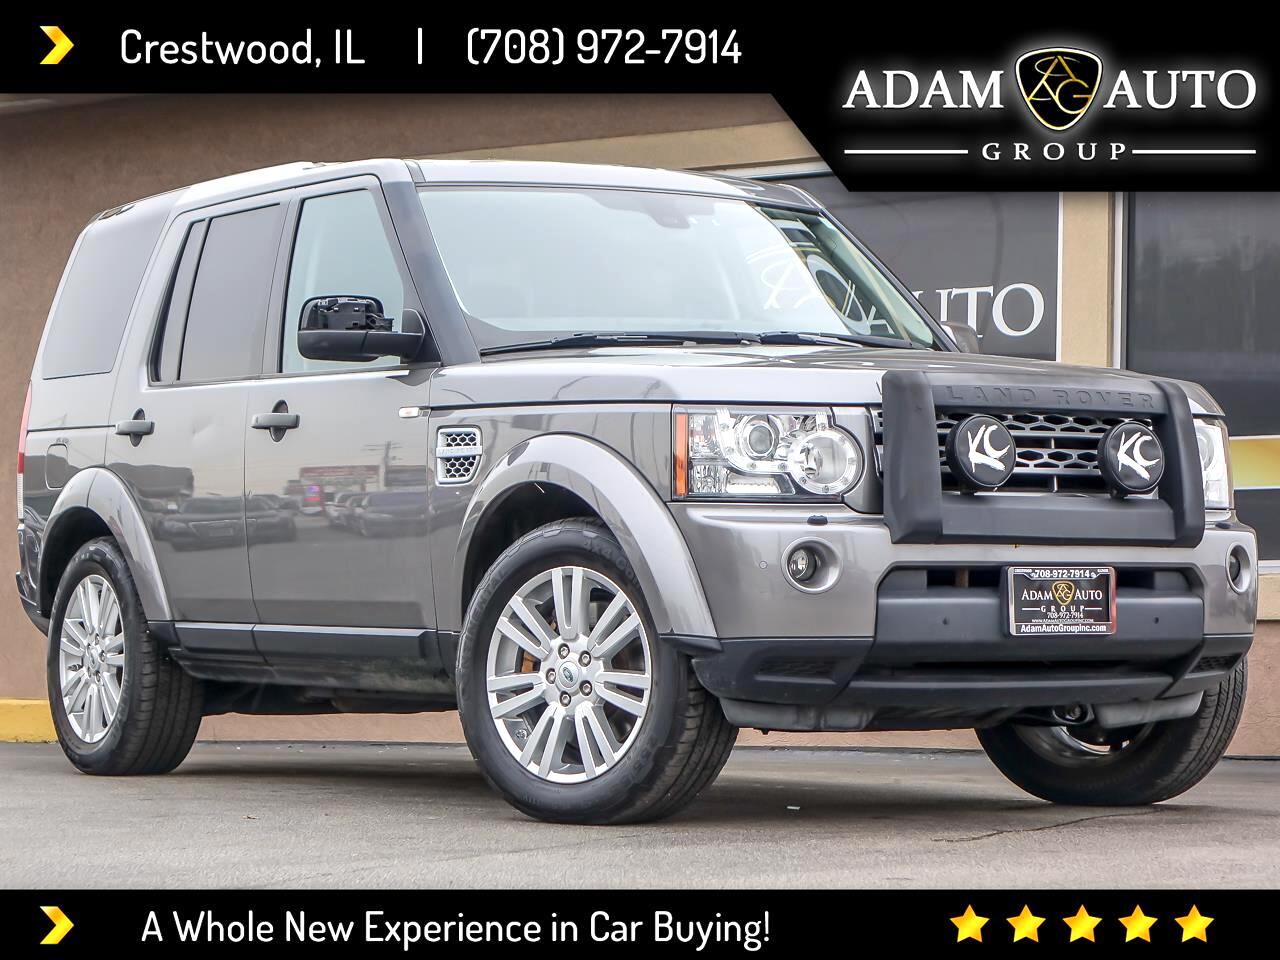 Used 2011 Land Rover Lr4 Hse Luxury For Sale In Crestwood Il